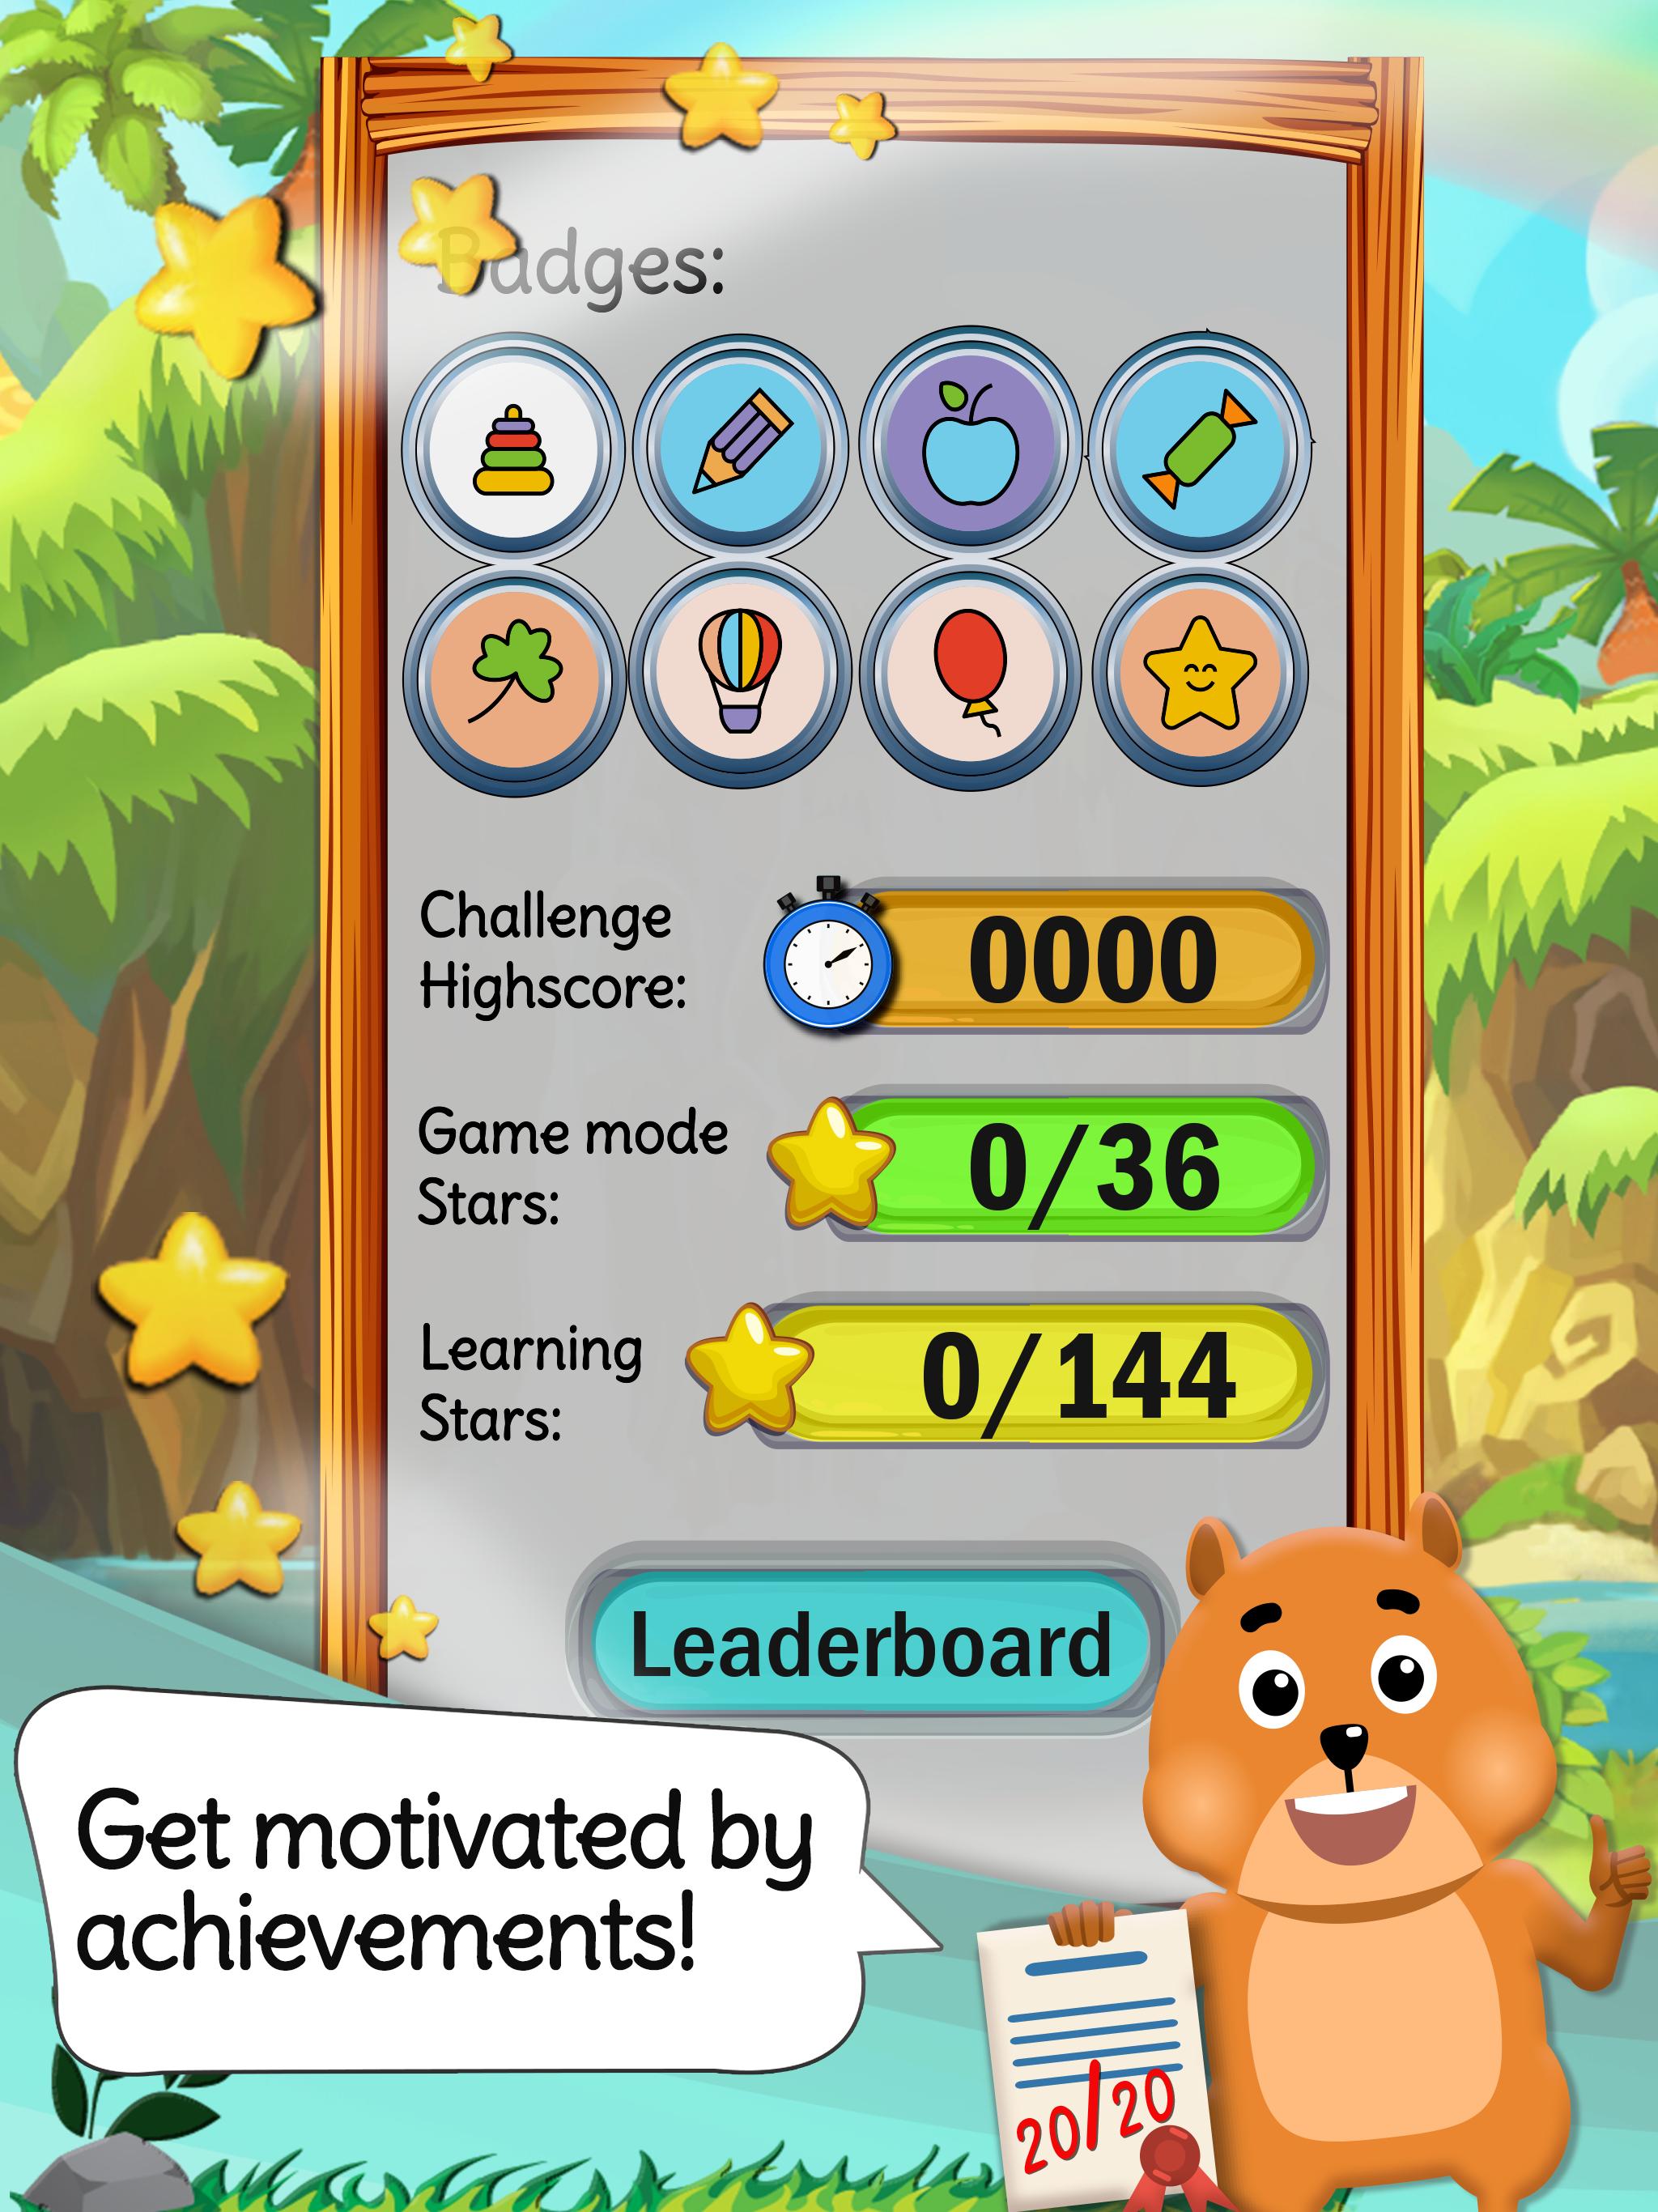 Times Tables & Friends: Free Multiplication Games 2.3.77 Screenshot 24